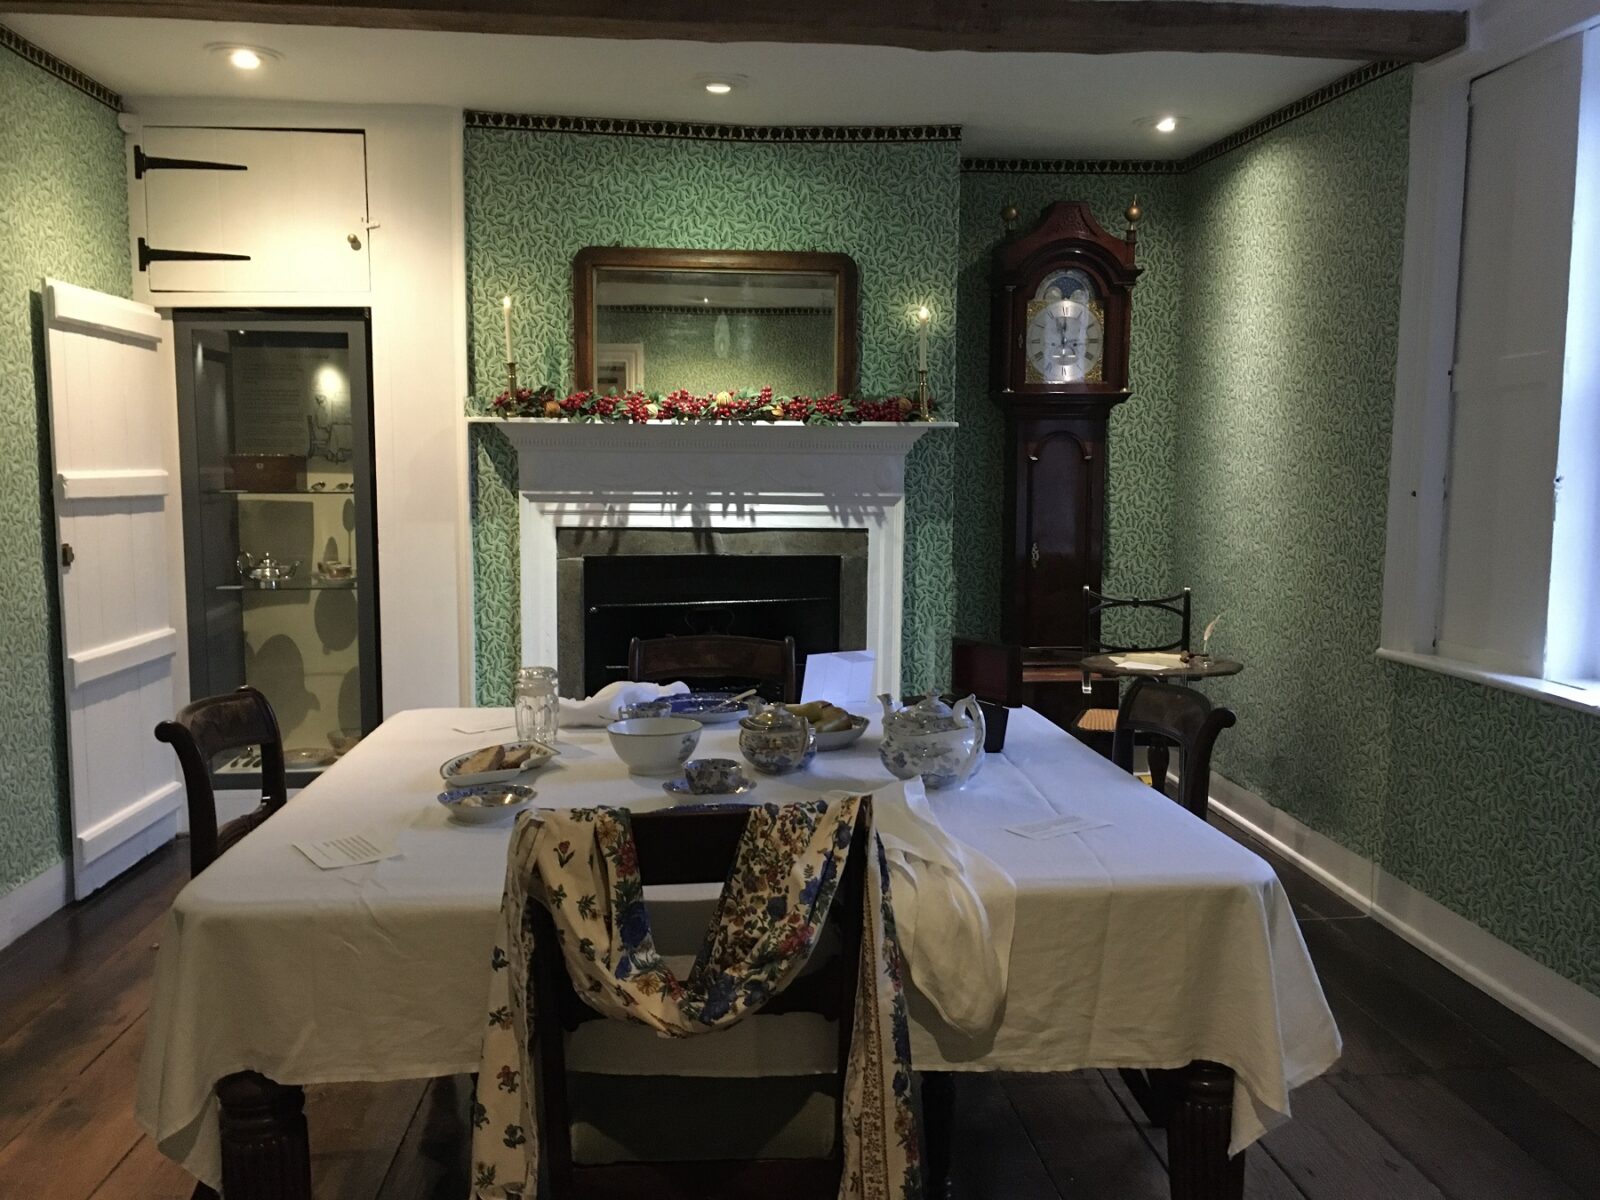 The Dining Room at Jane Austen's House